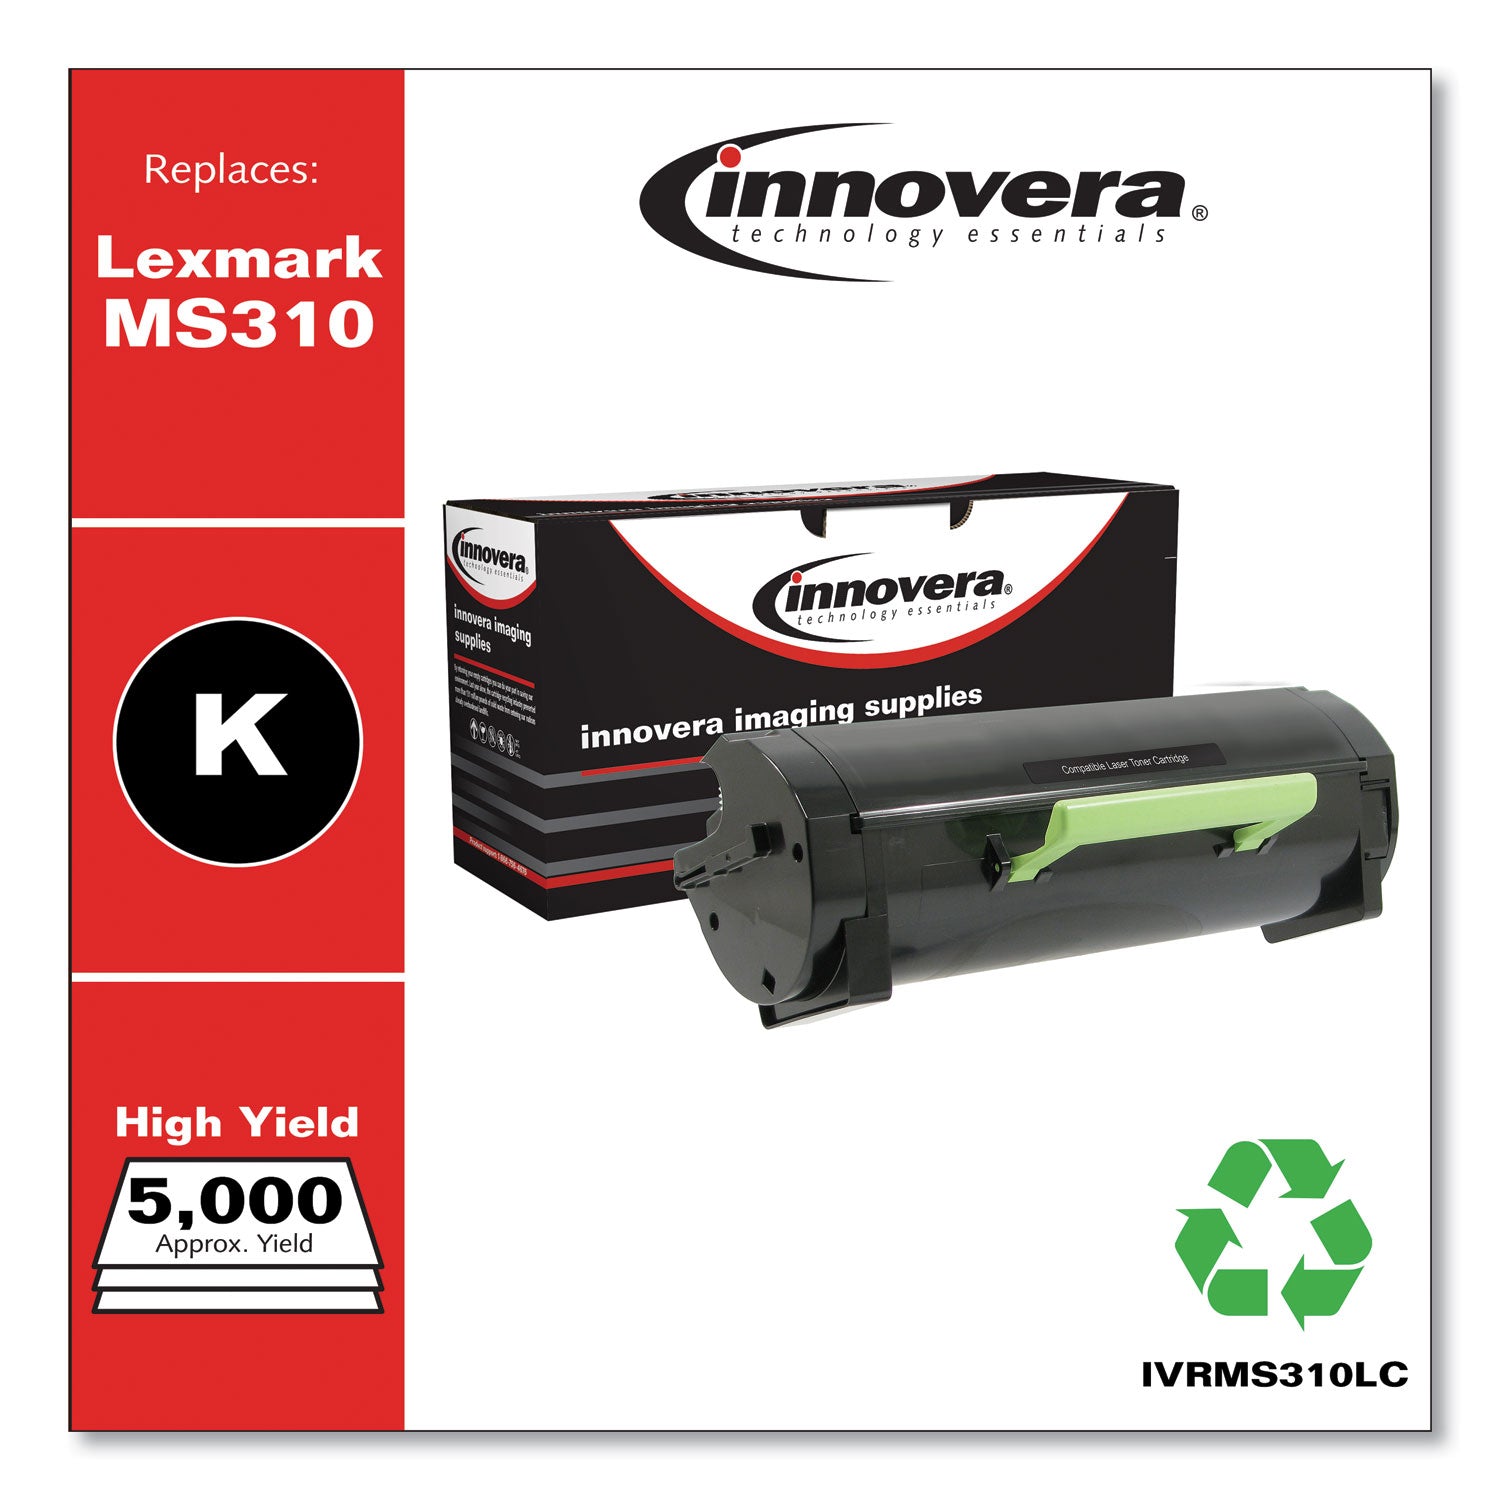 remanufactured-black-high-yield-toner-replacement-for-ms310-5000-page-yield_ivrms310lc - 2